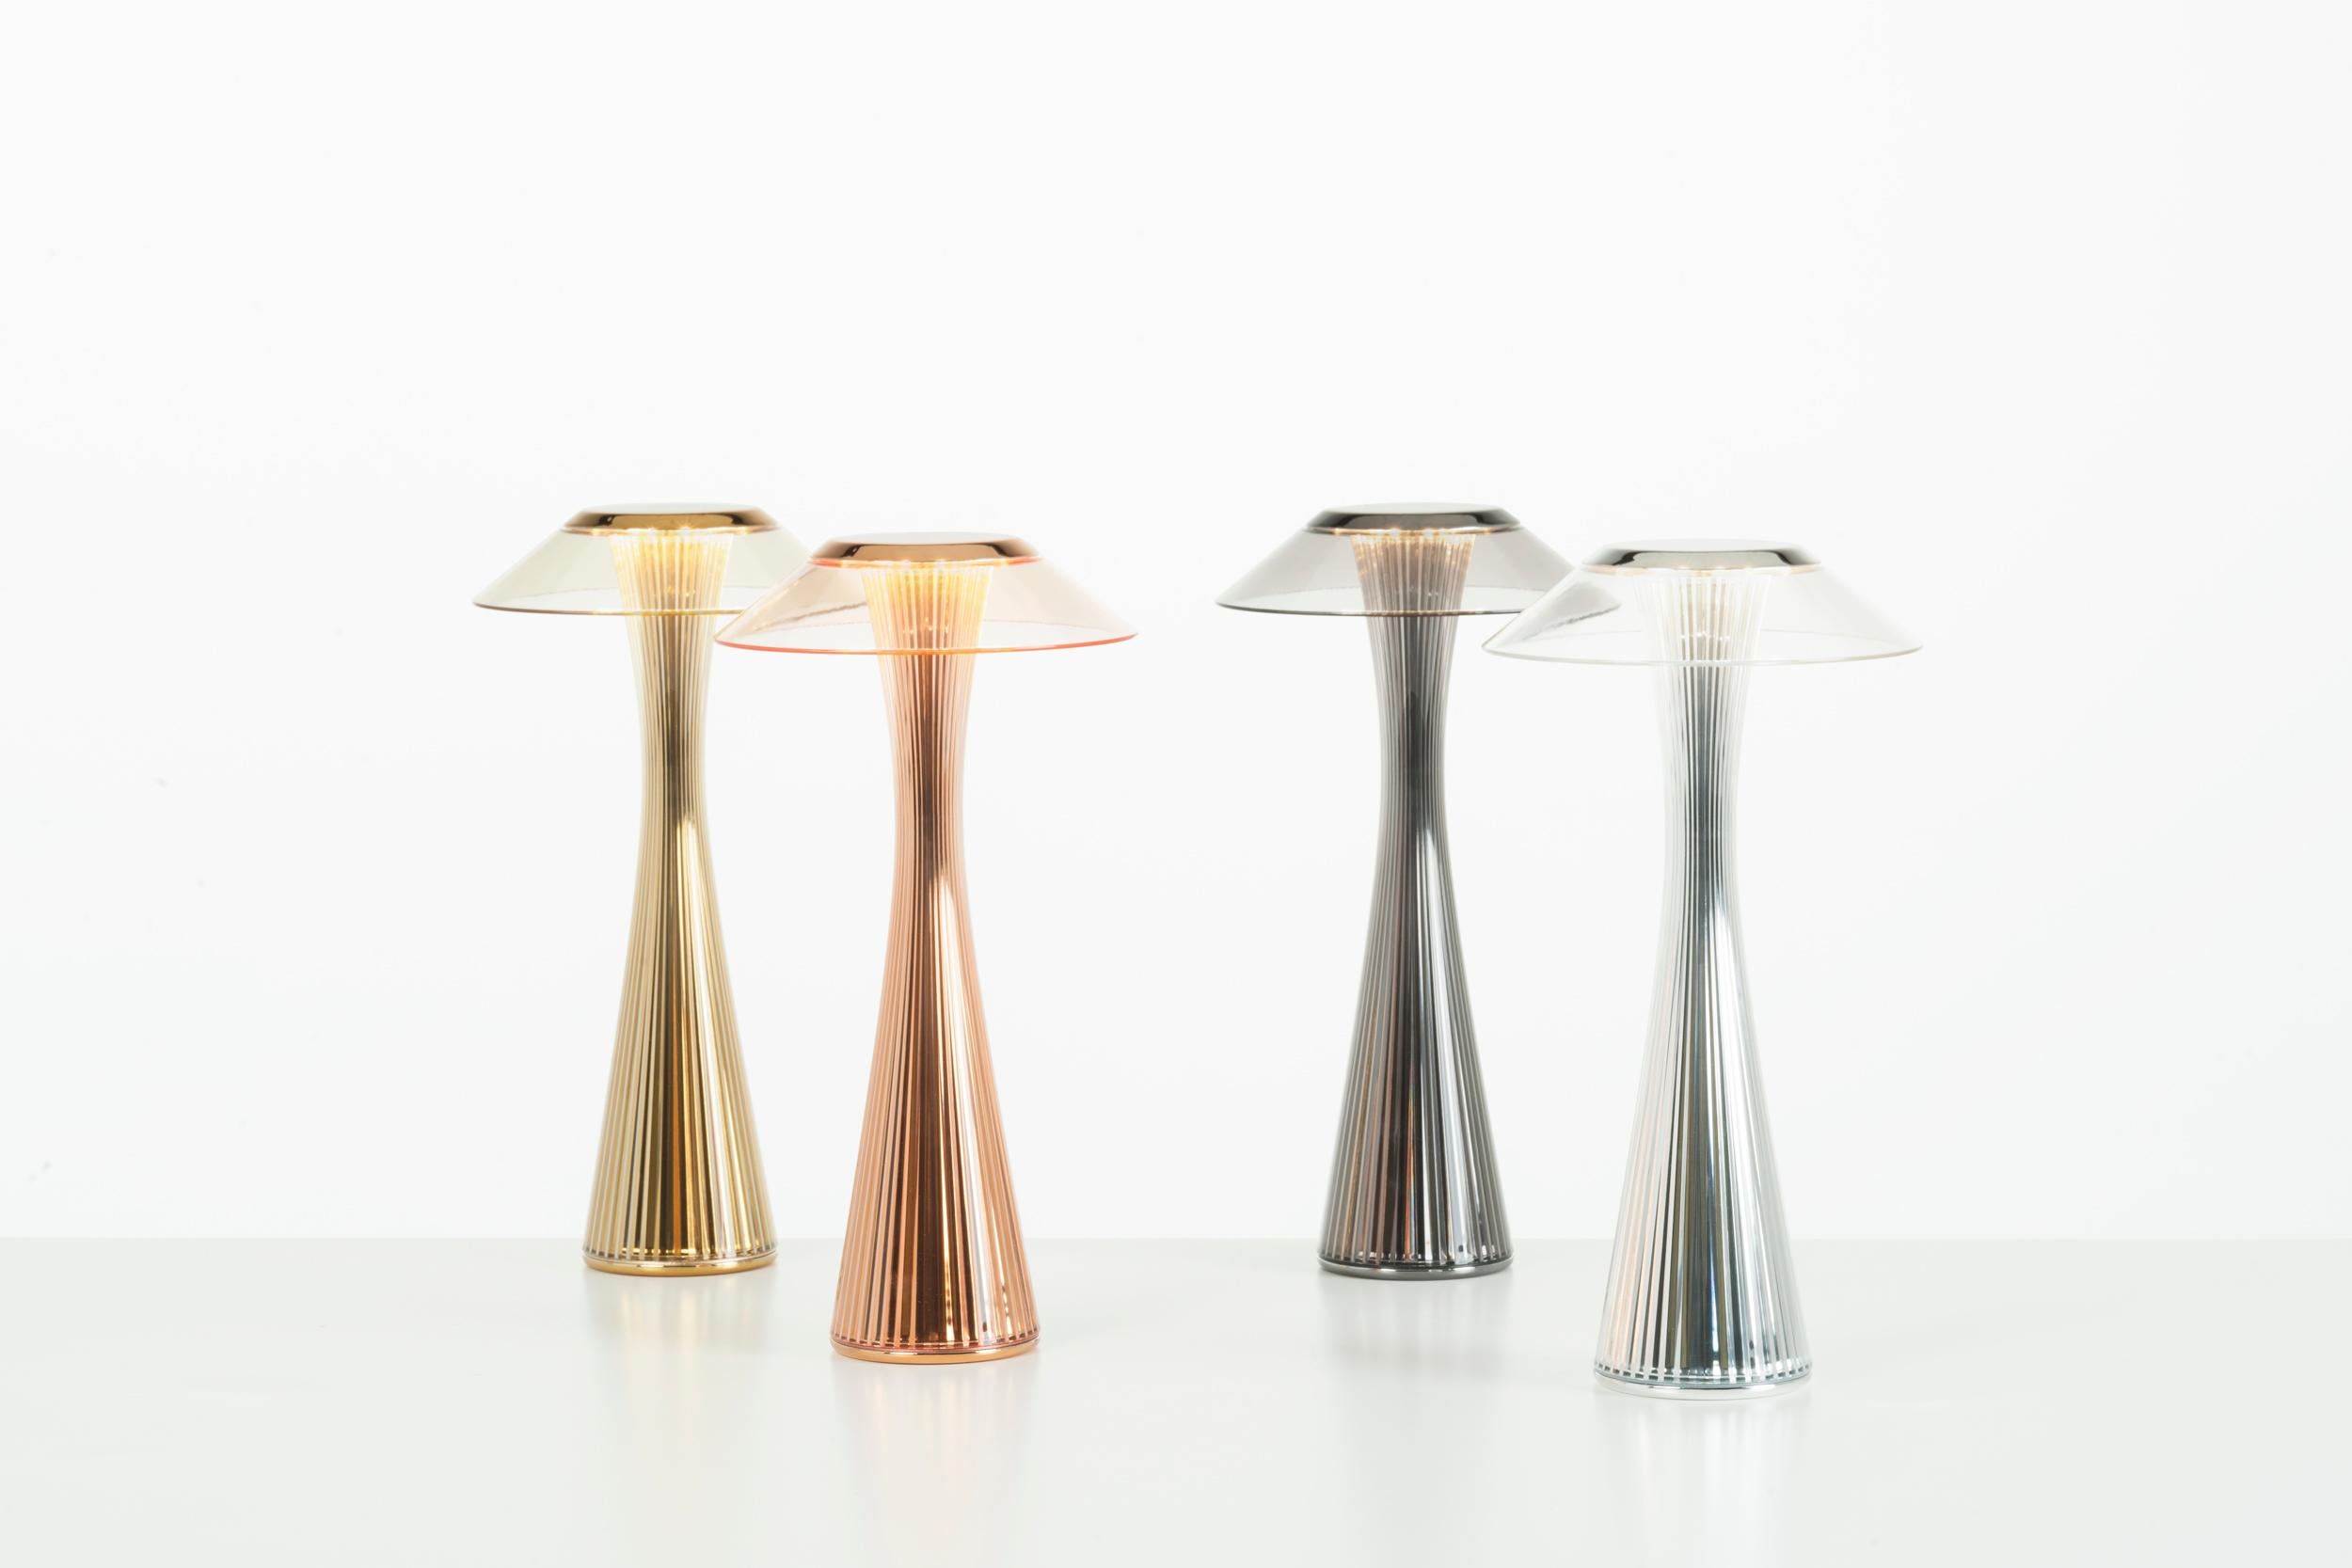 A table lamp made of transparent plastic with an elongated shape: the silhouette recalls the shapes of the space needle, the tower that made the Seattle skyline famous. “In designing the ‘Space’ lamp, we drew inspiration from the futuristic spirit